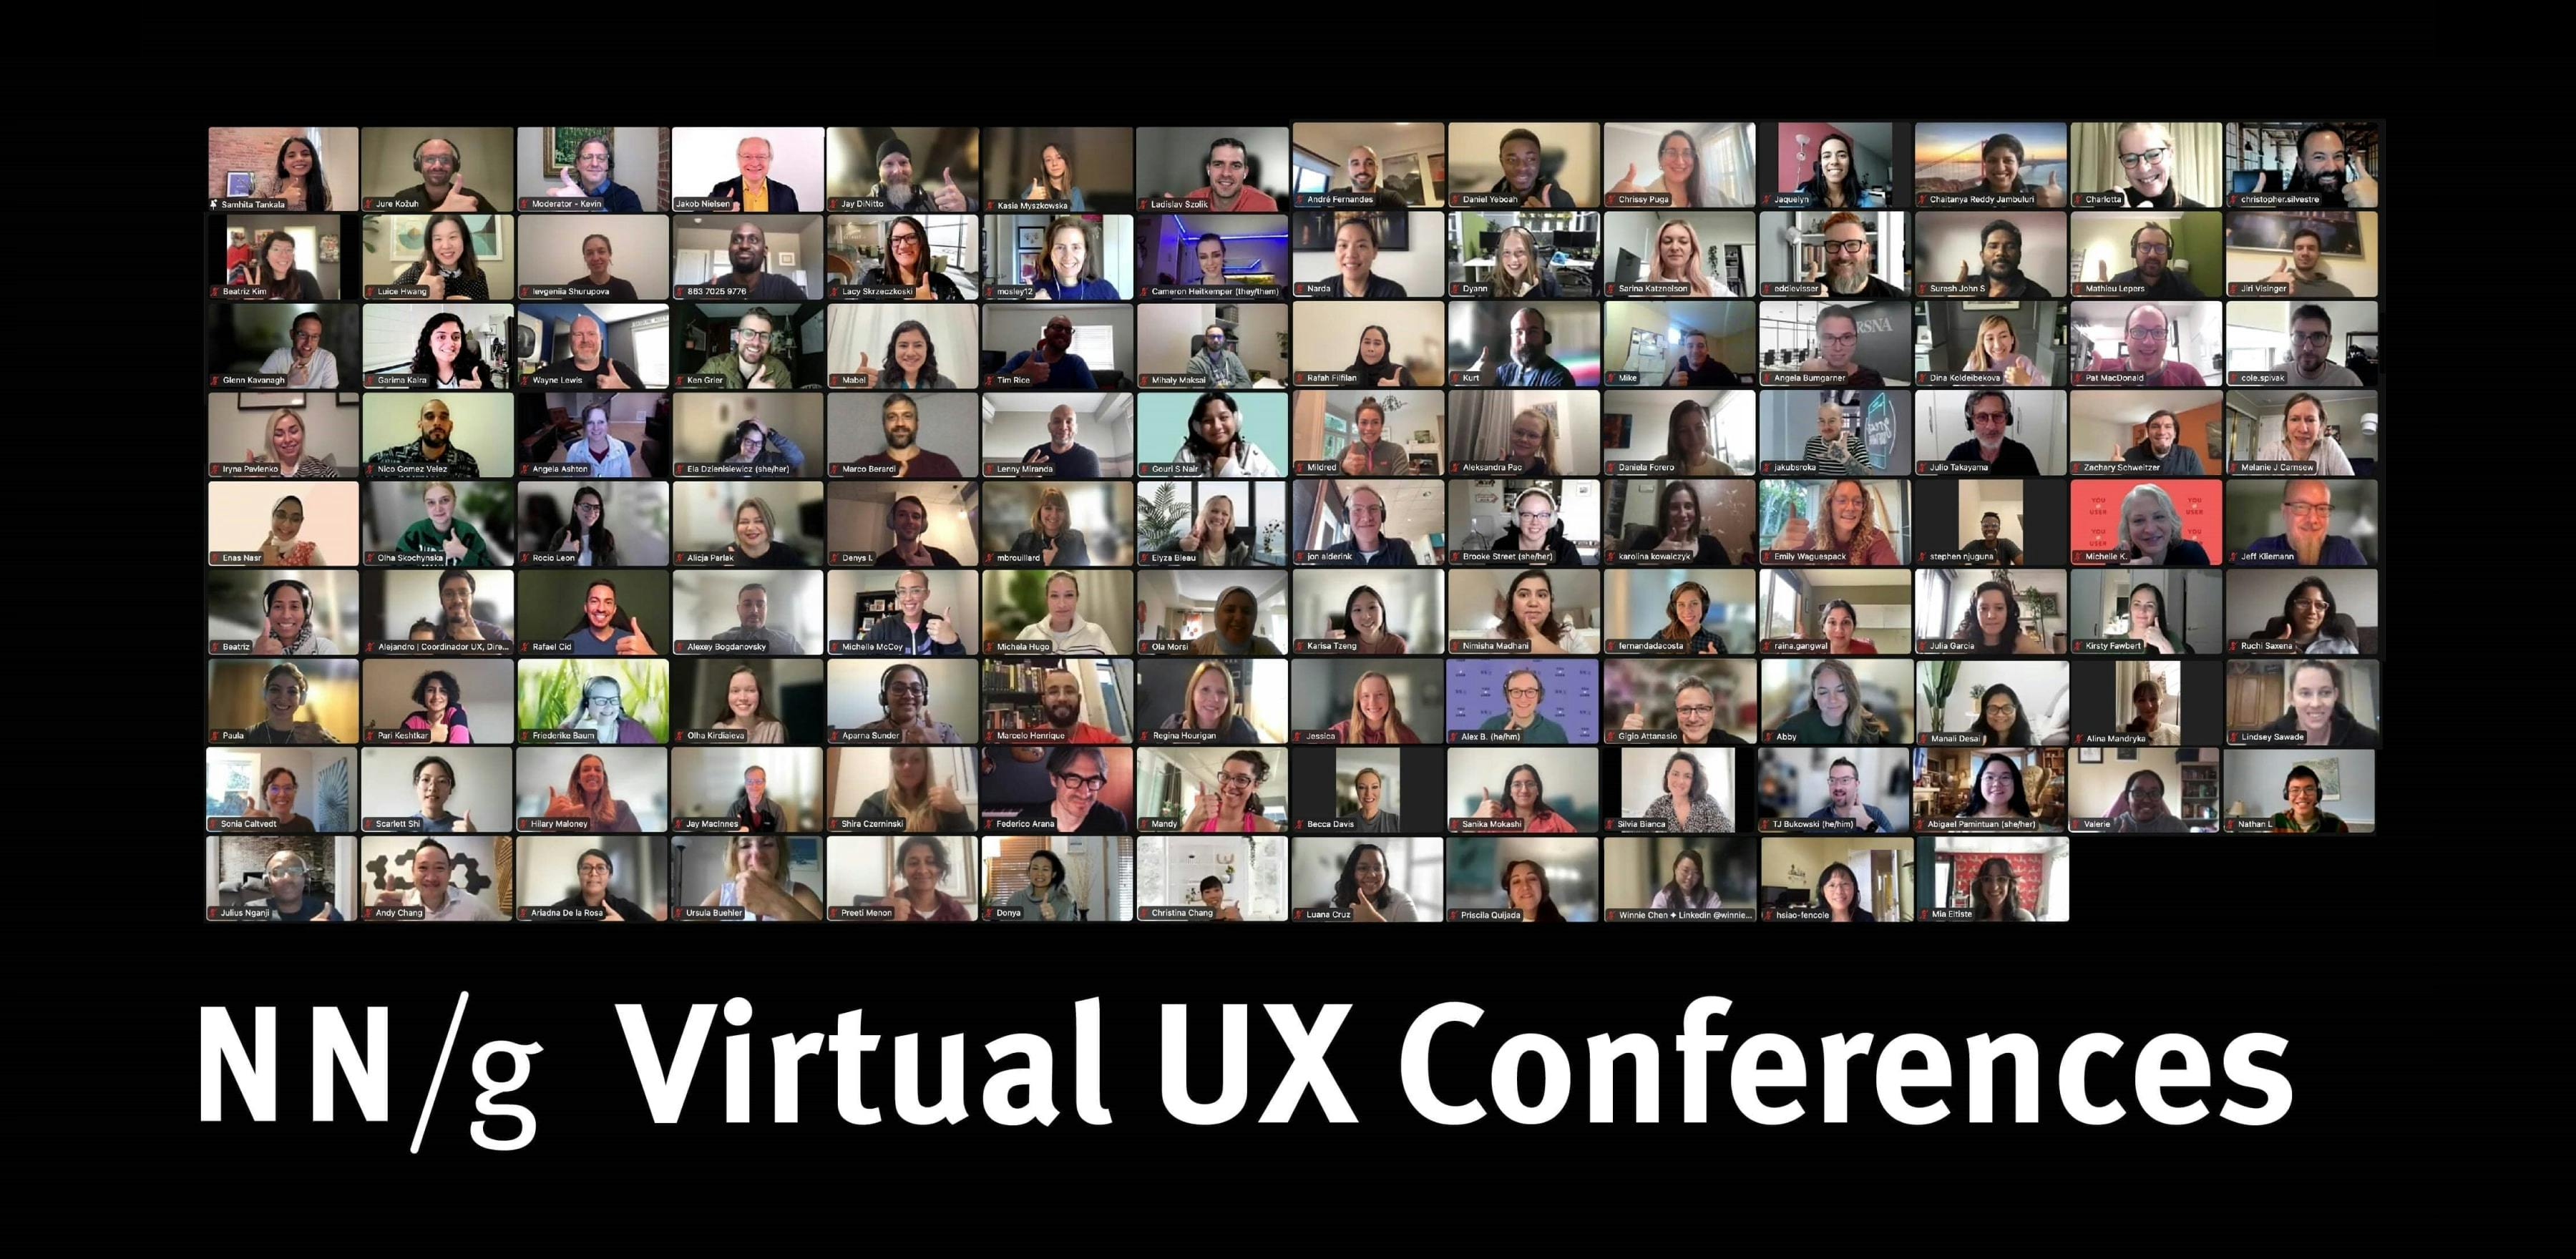 Reasons for and my experience with NN/g’s Virtual training and UX certification